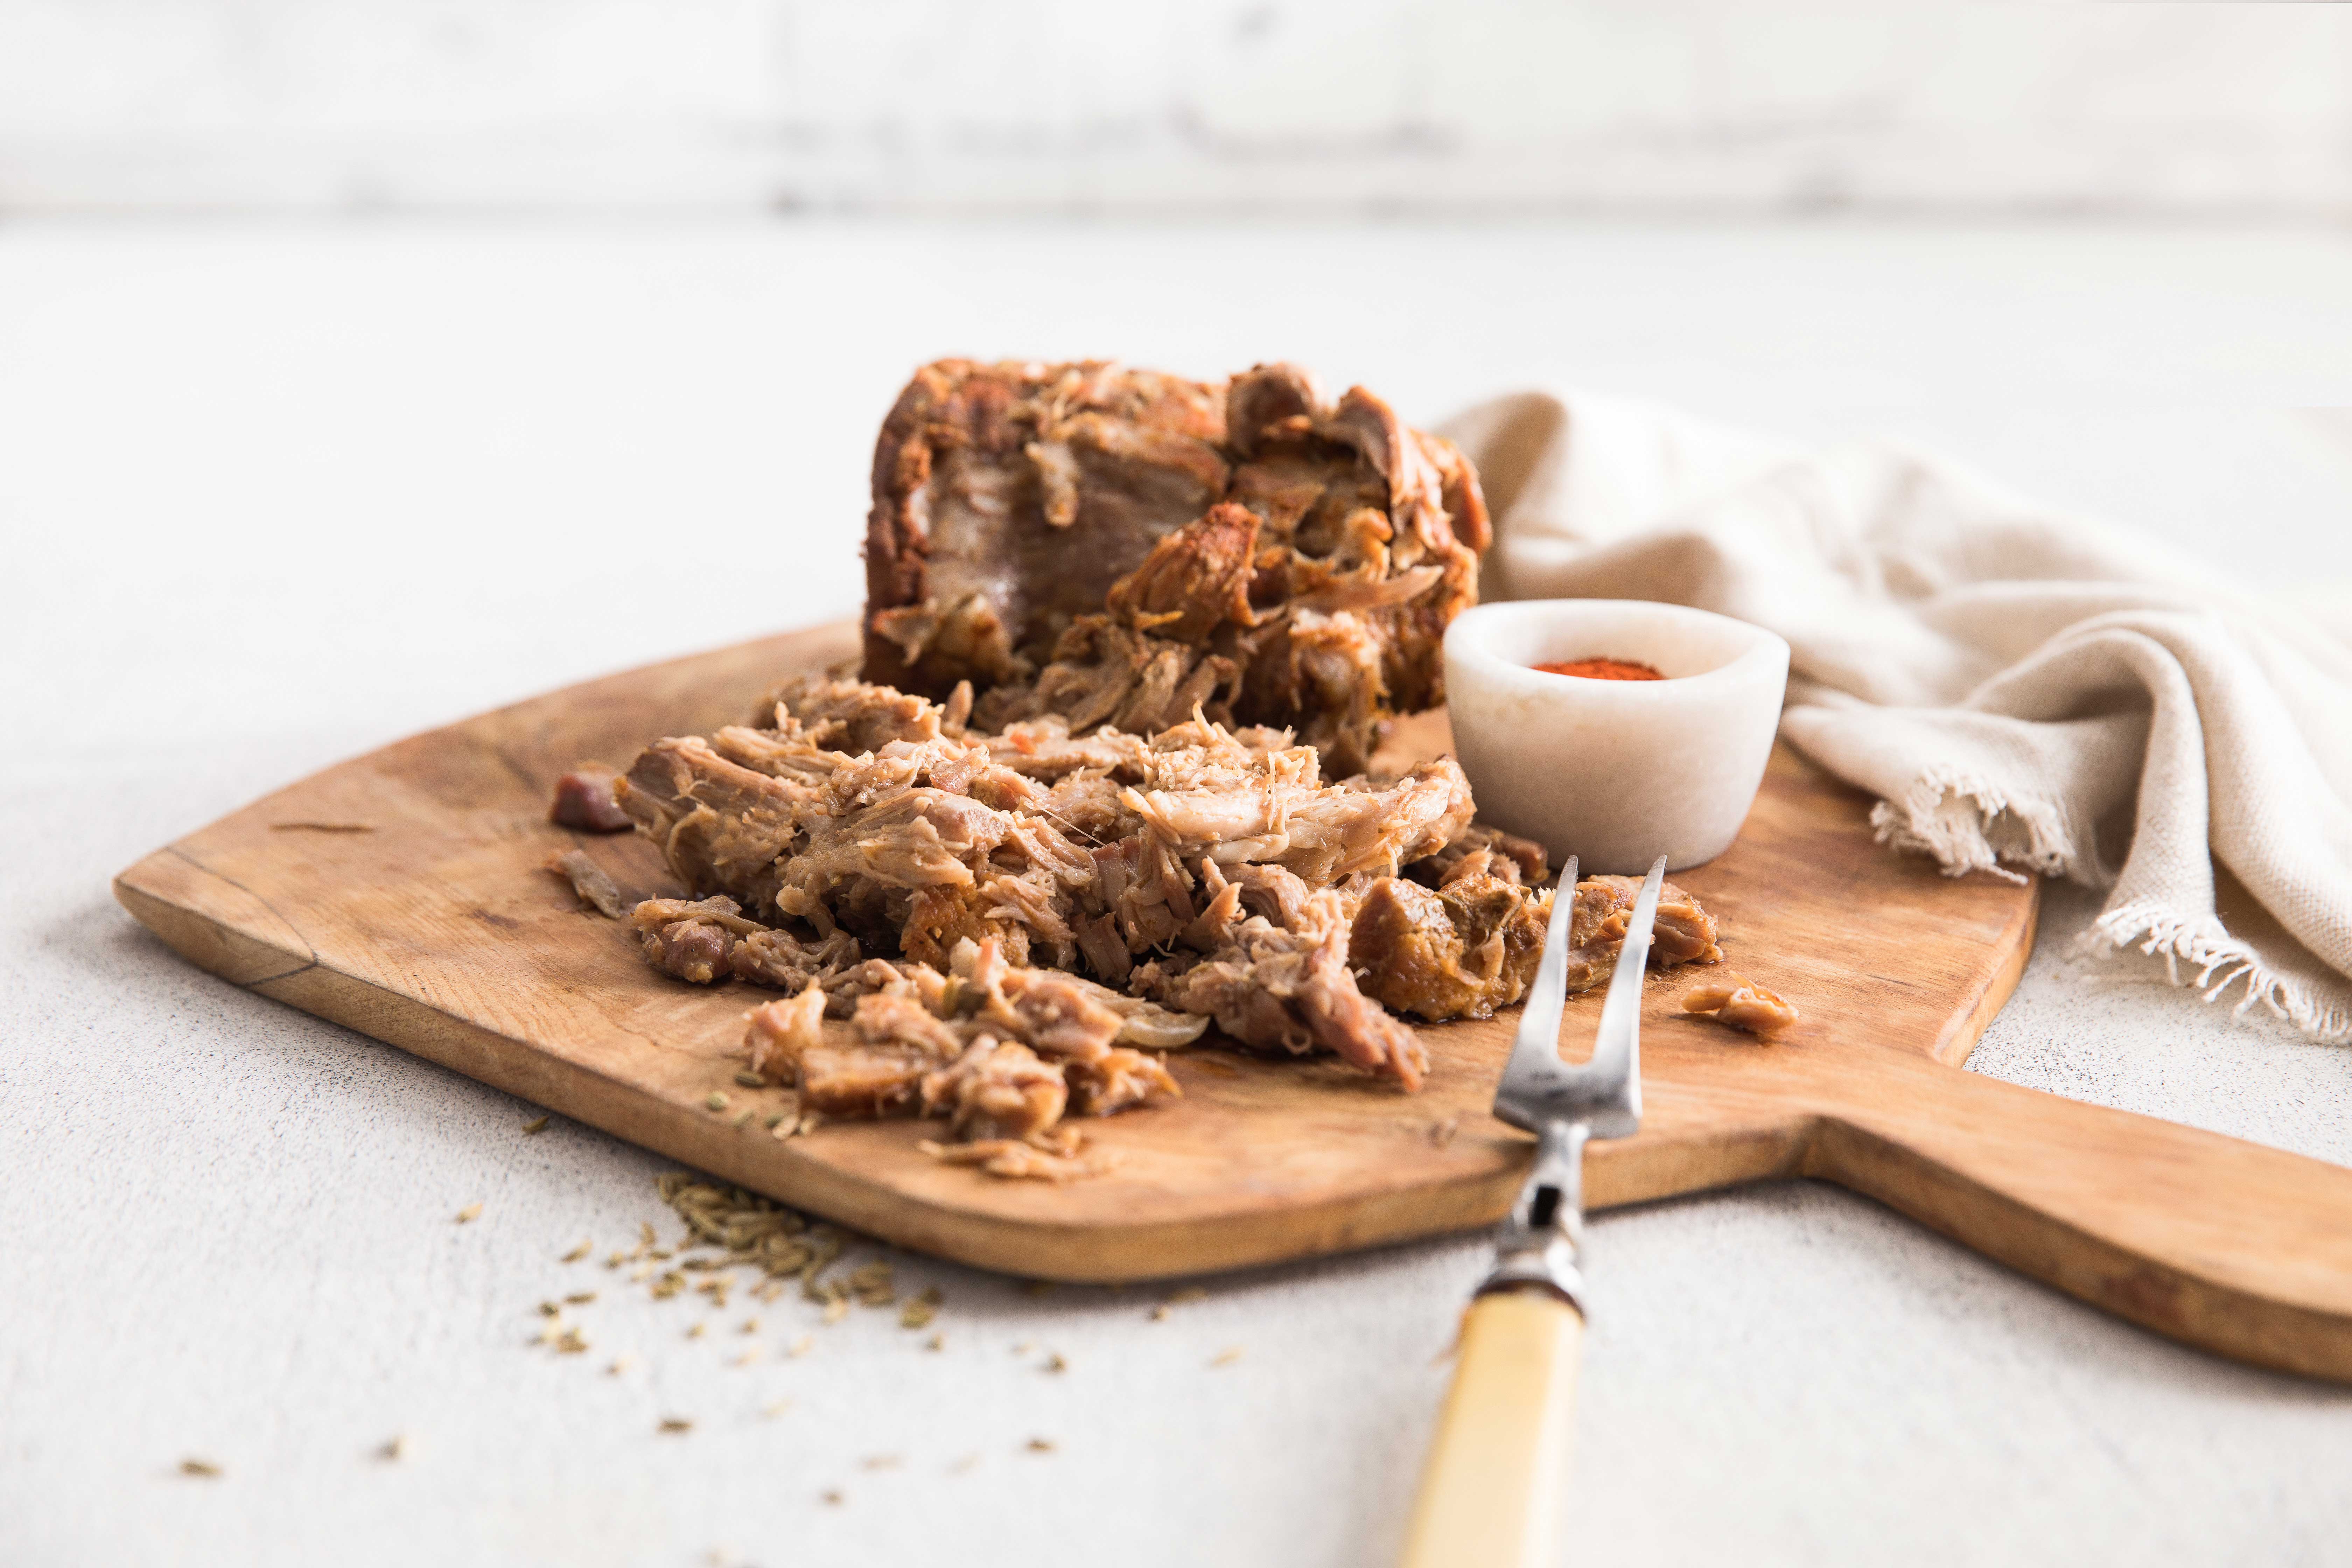 Easy peasy pulled pork shredded on a wooden cutting board with a large meat fork and a small bowl of sauce.